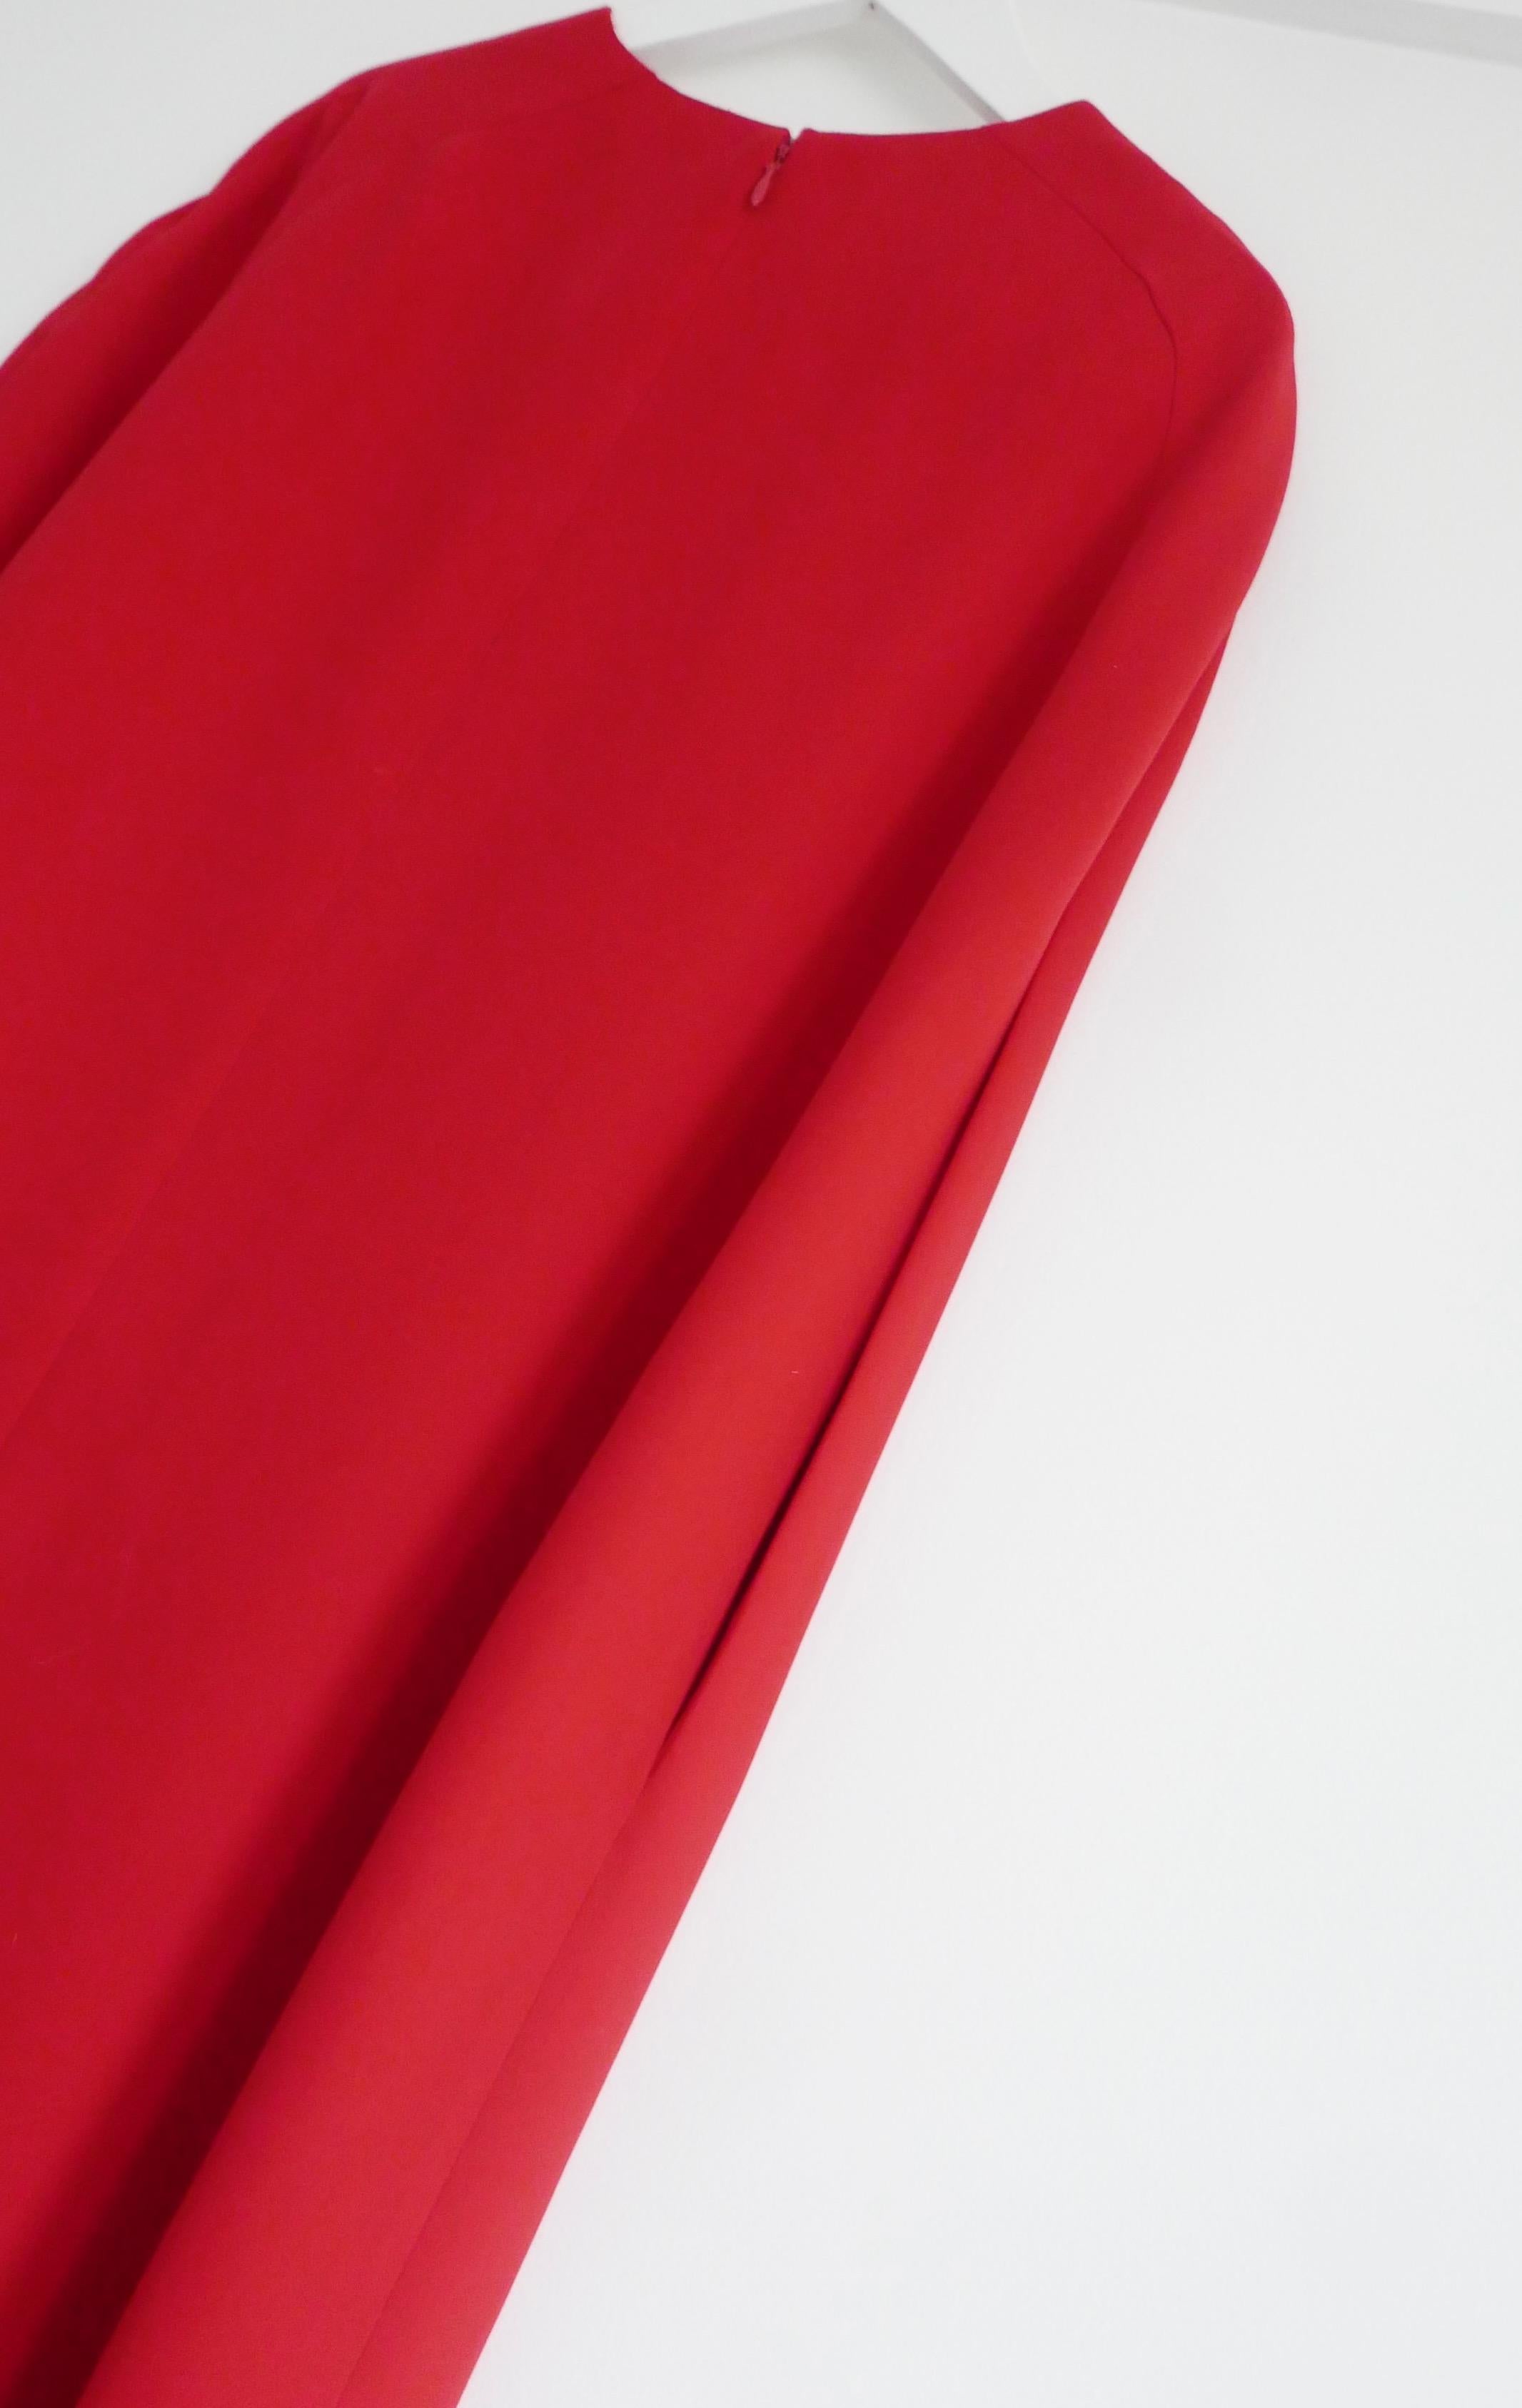 Iconic Valentino red cape dress from the Pre-Fall 2014 collection. Has been newly dry cleaned. Made from the label’s signature vivid ‘Valentino Red’ silk crepe, it has a dramatic minimalist cape inspired cut with deep arm slits and floor length hem.